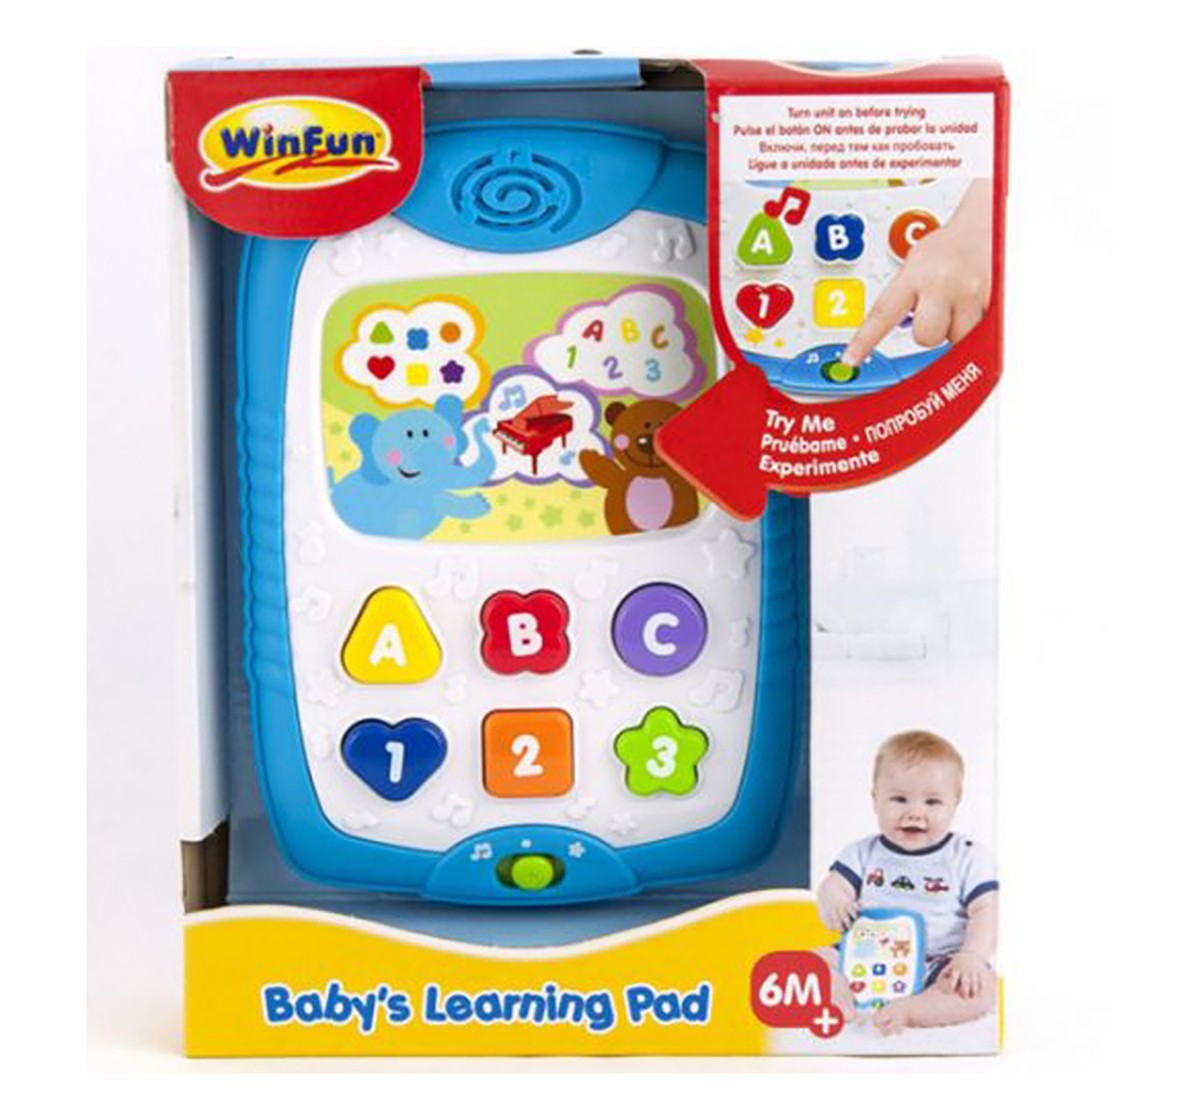 Winfun - Baby'S Learning Pad Toys for Kids age 6M+ 